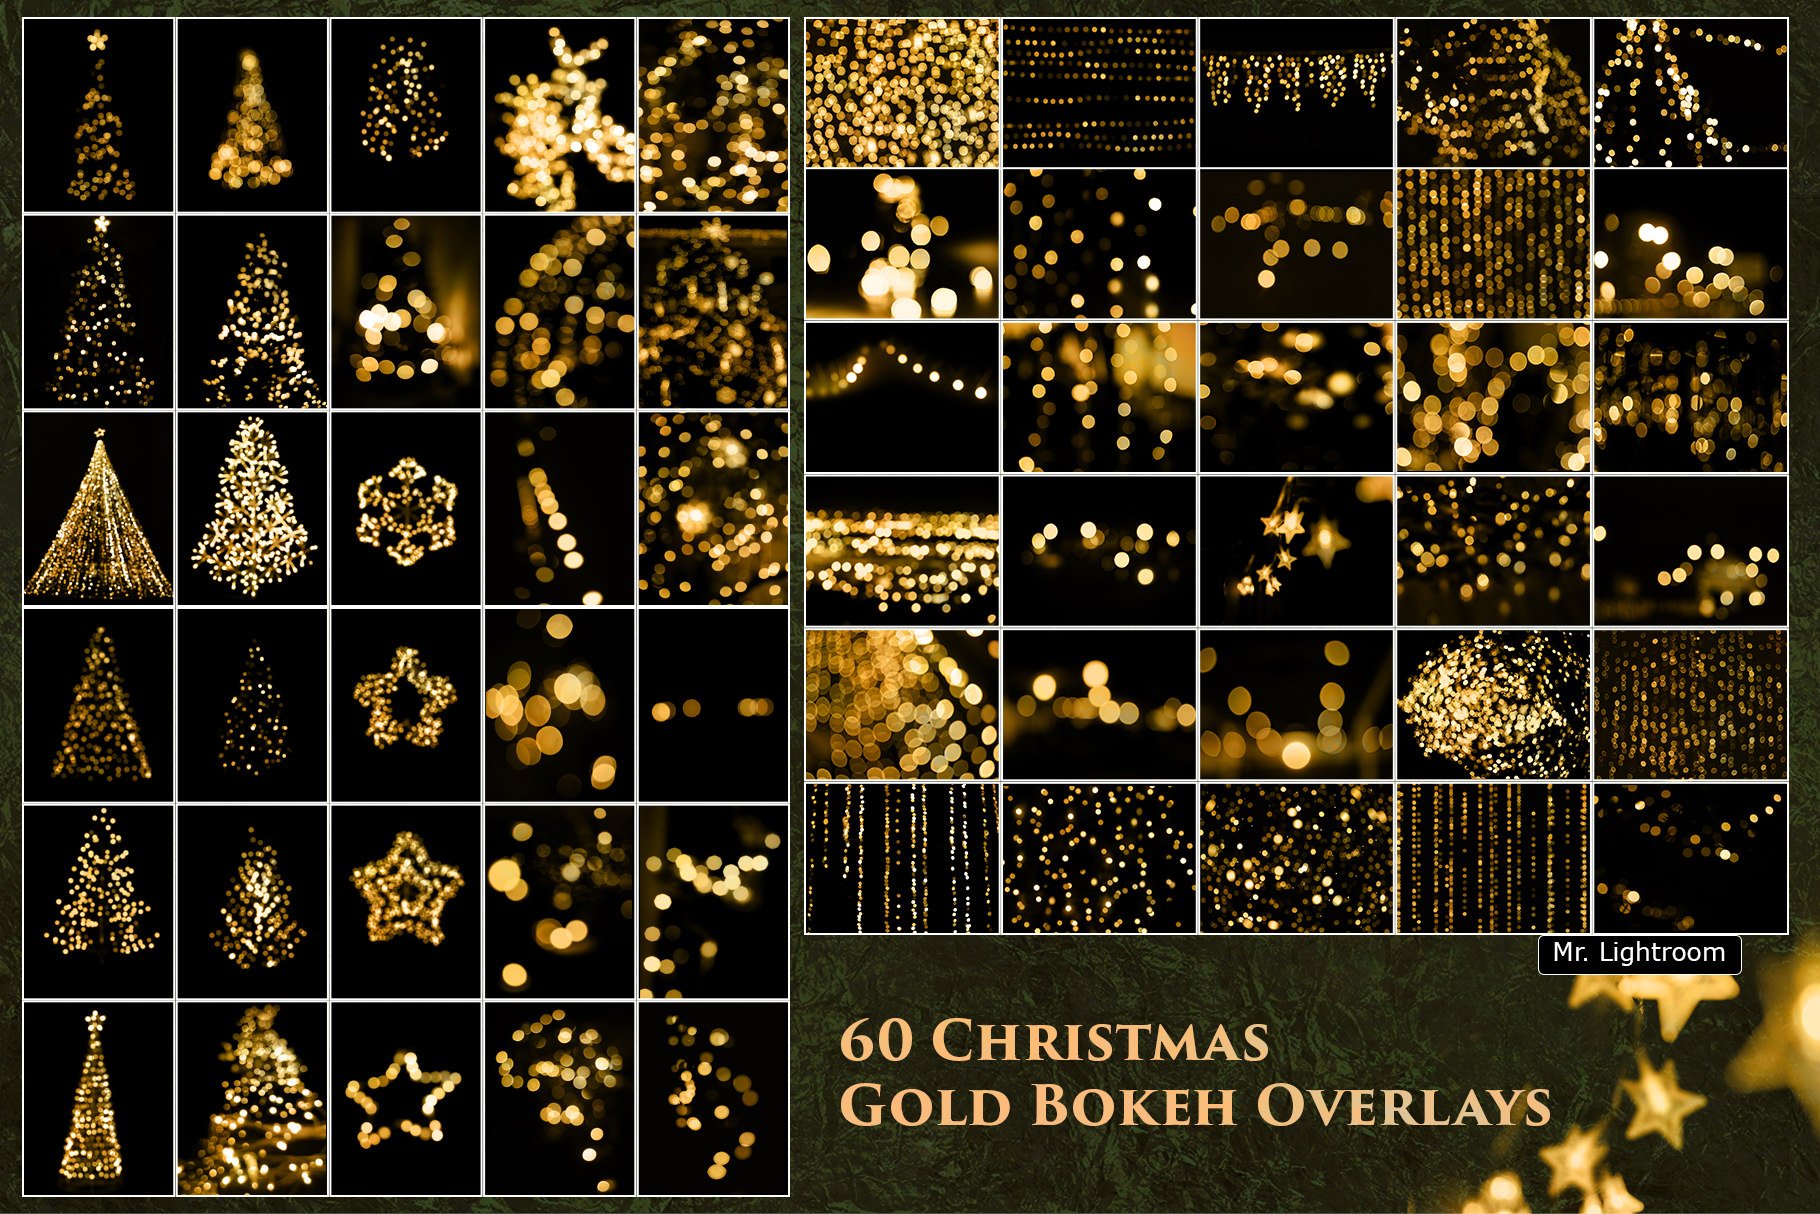 60 Christmas Gold Bokeh Overlayspreview image.